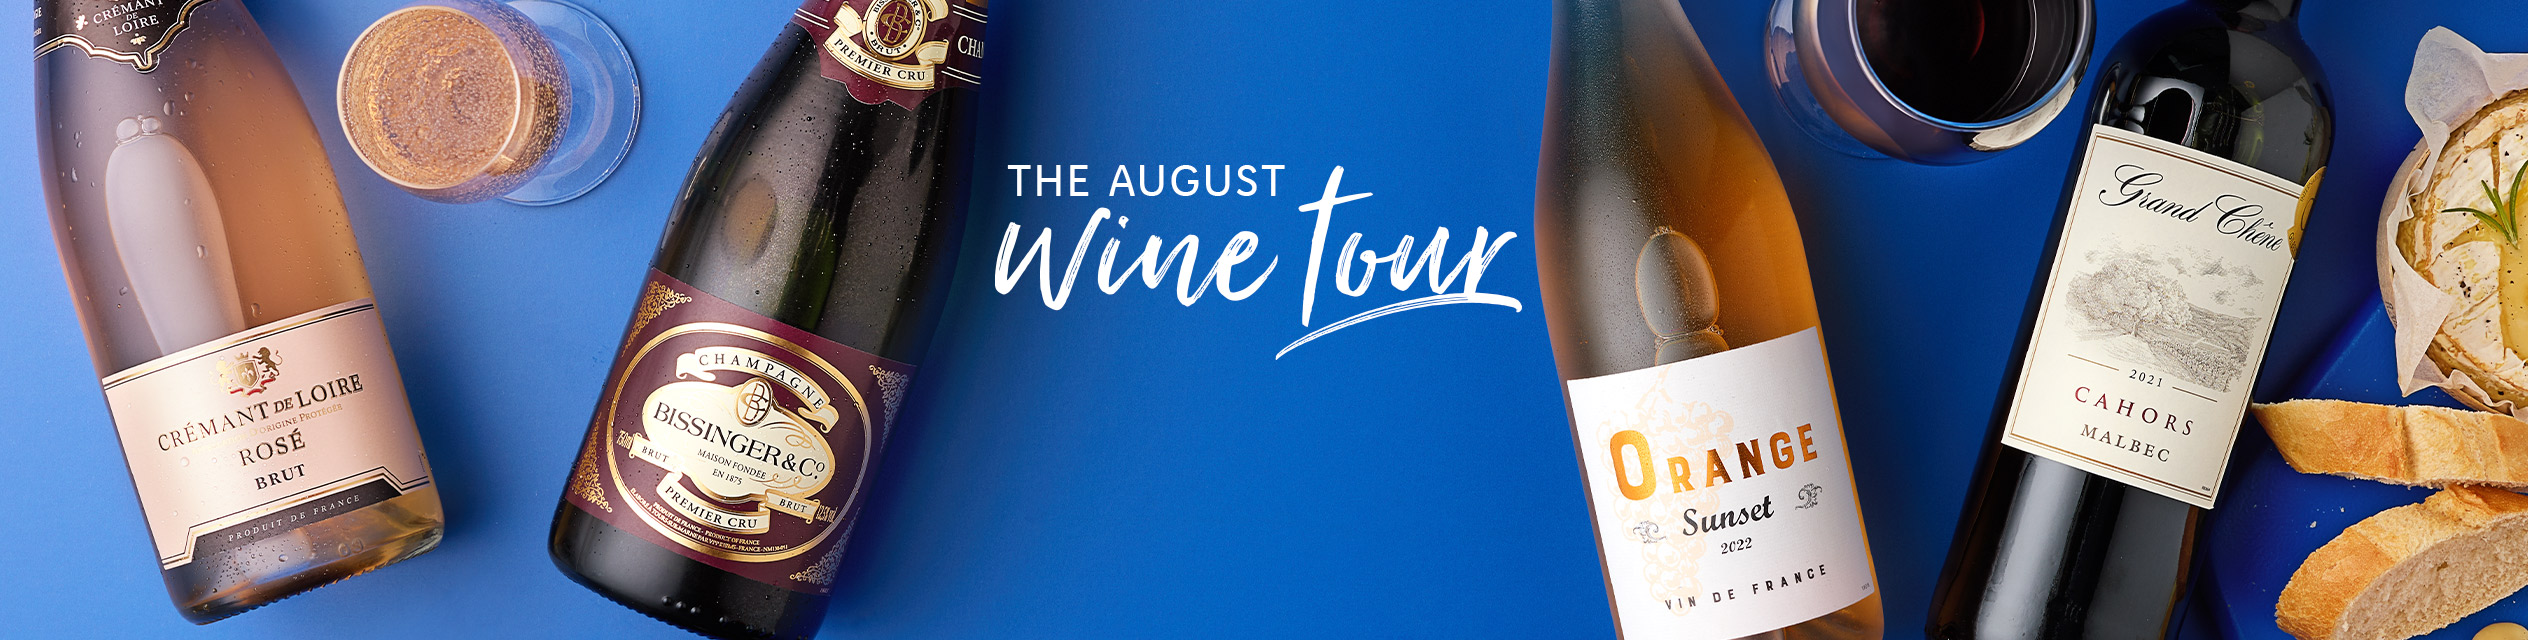 The August Wine Tour